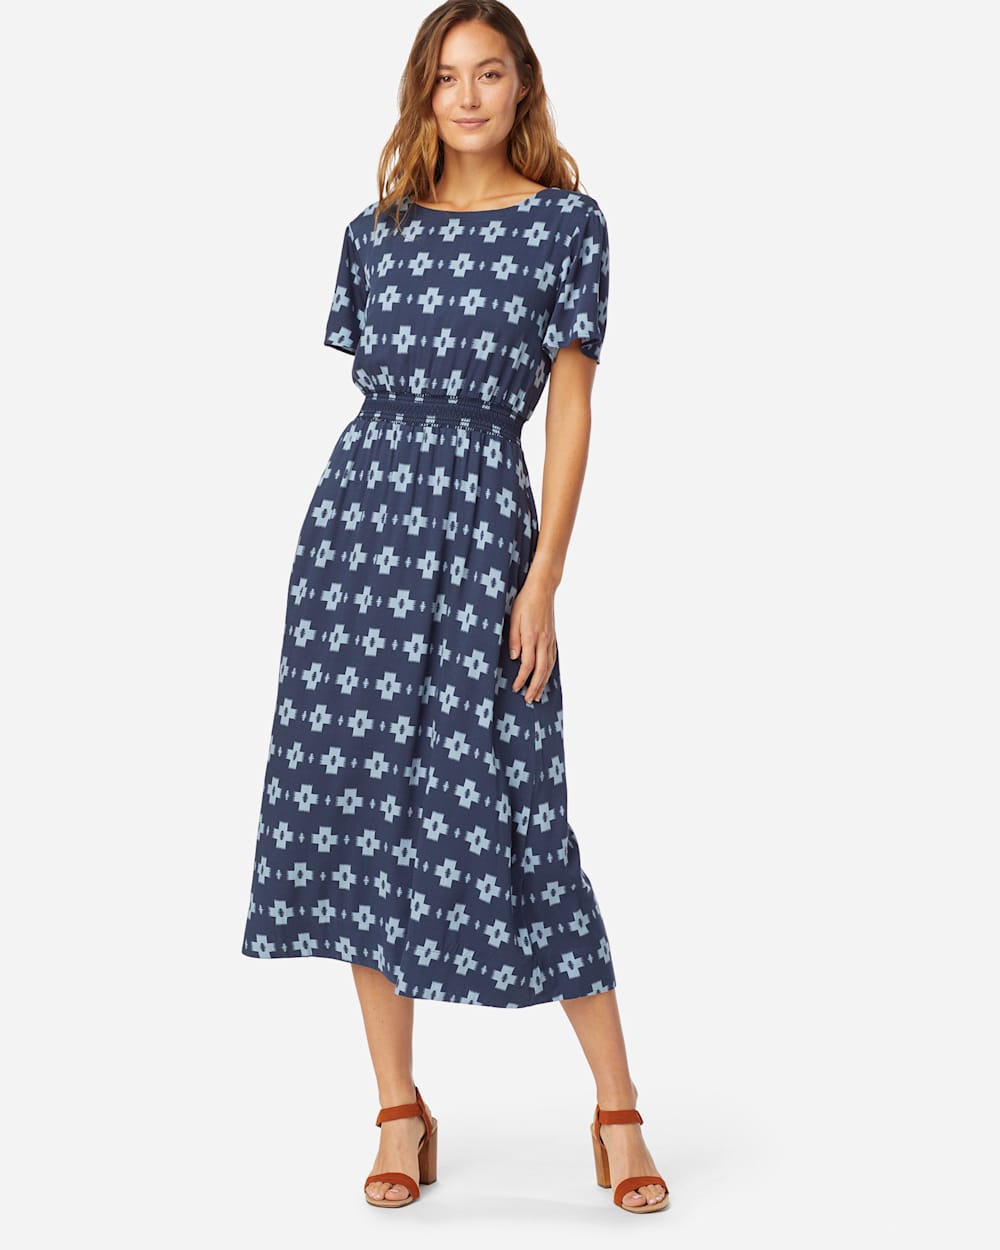 SHORT-SLEEVE PATTERNED MIDI DRESS IN NAVY image number 1